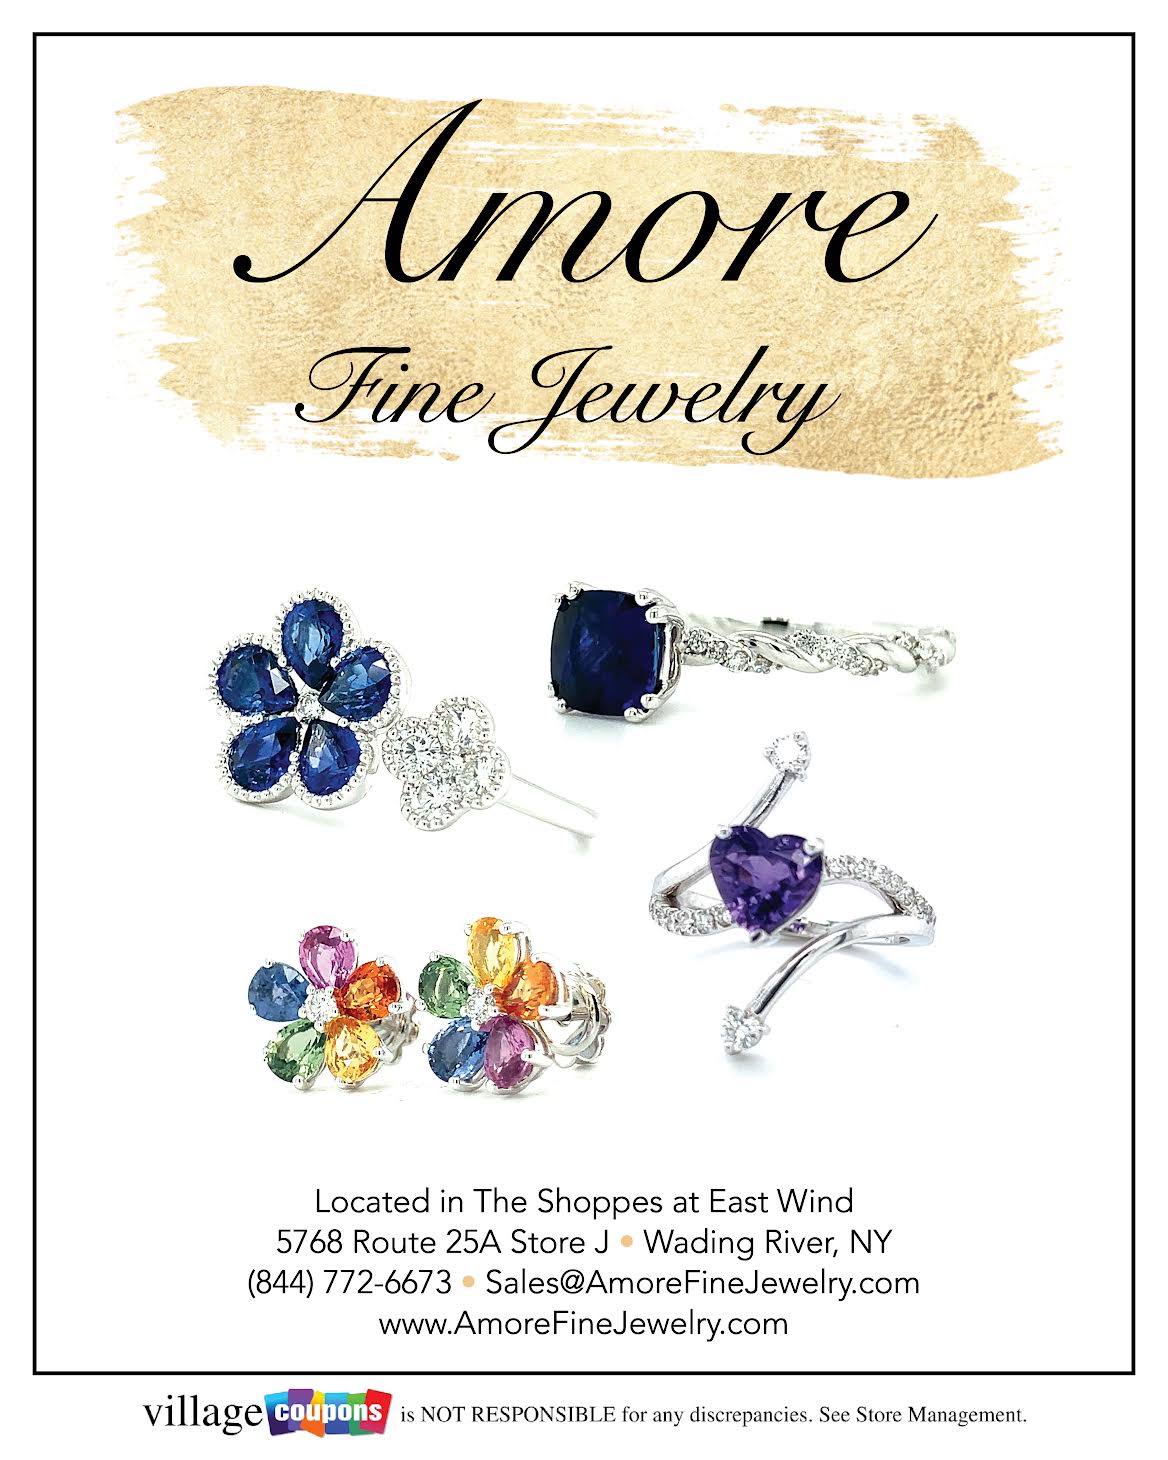 An advertisement for amore fine jewelry shows a variety of rings